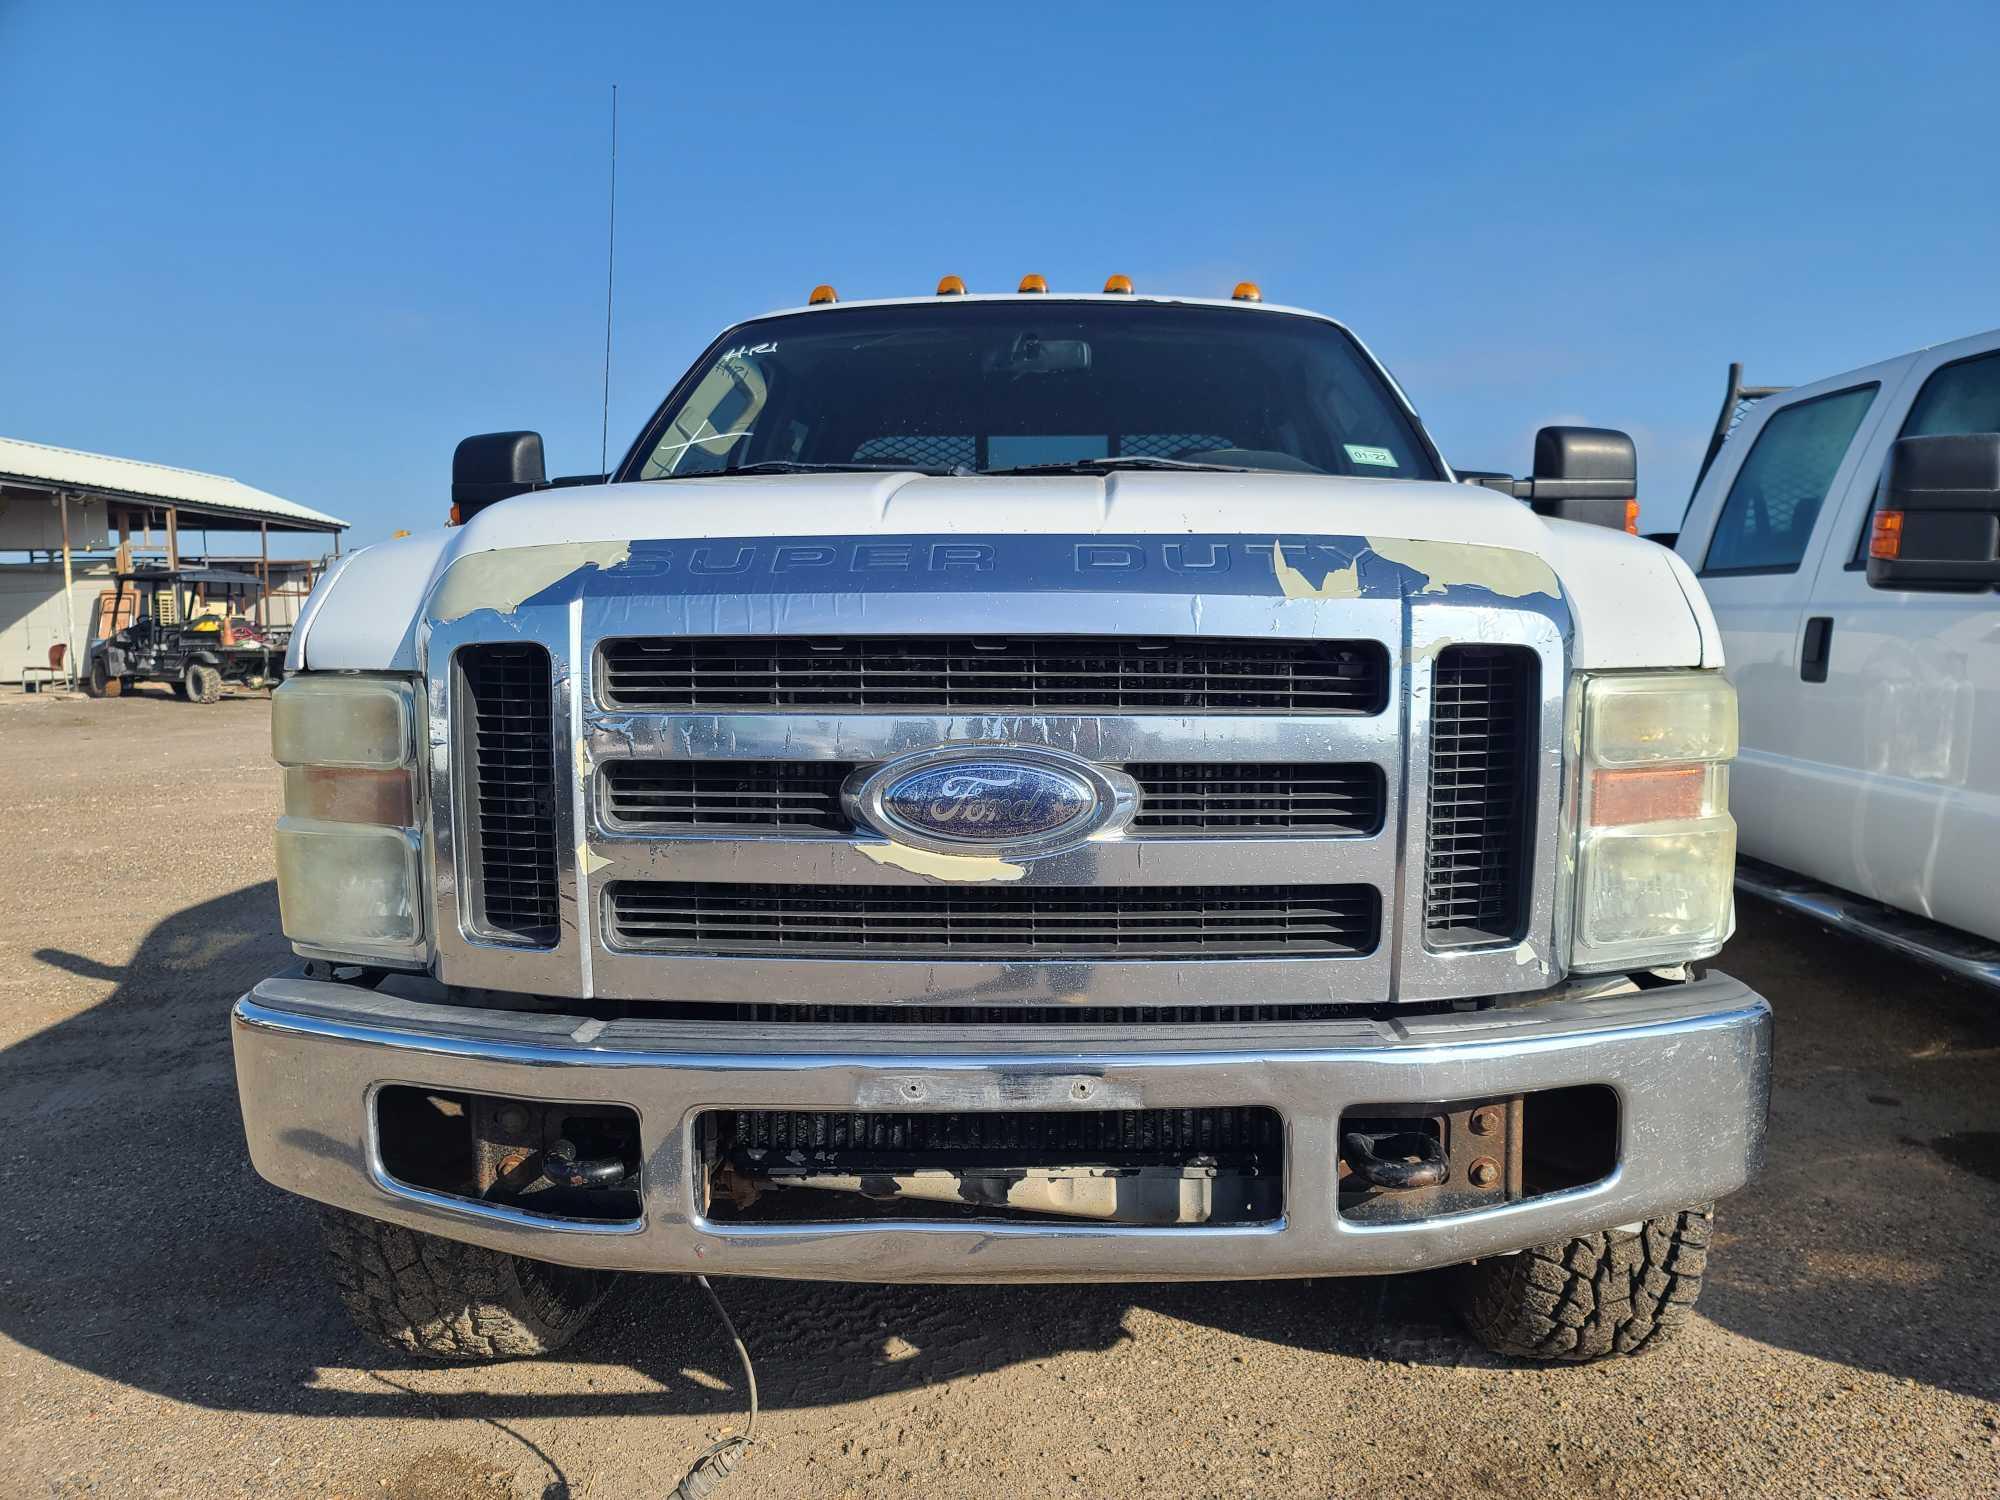 2008 Ford F-250 Pickup Truck, VIN # 1FTSW21R58EE33764